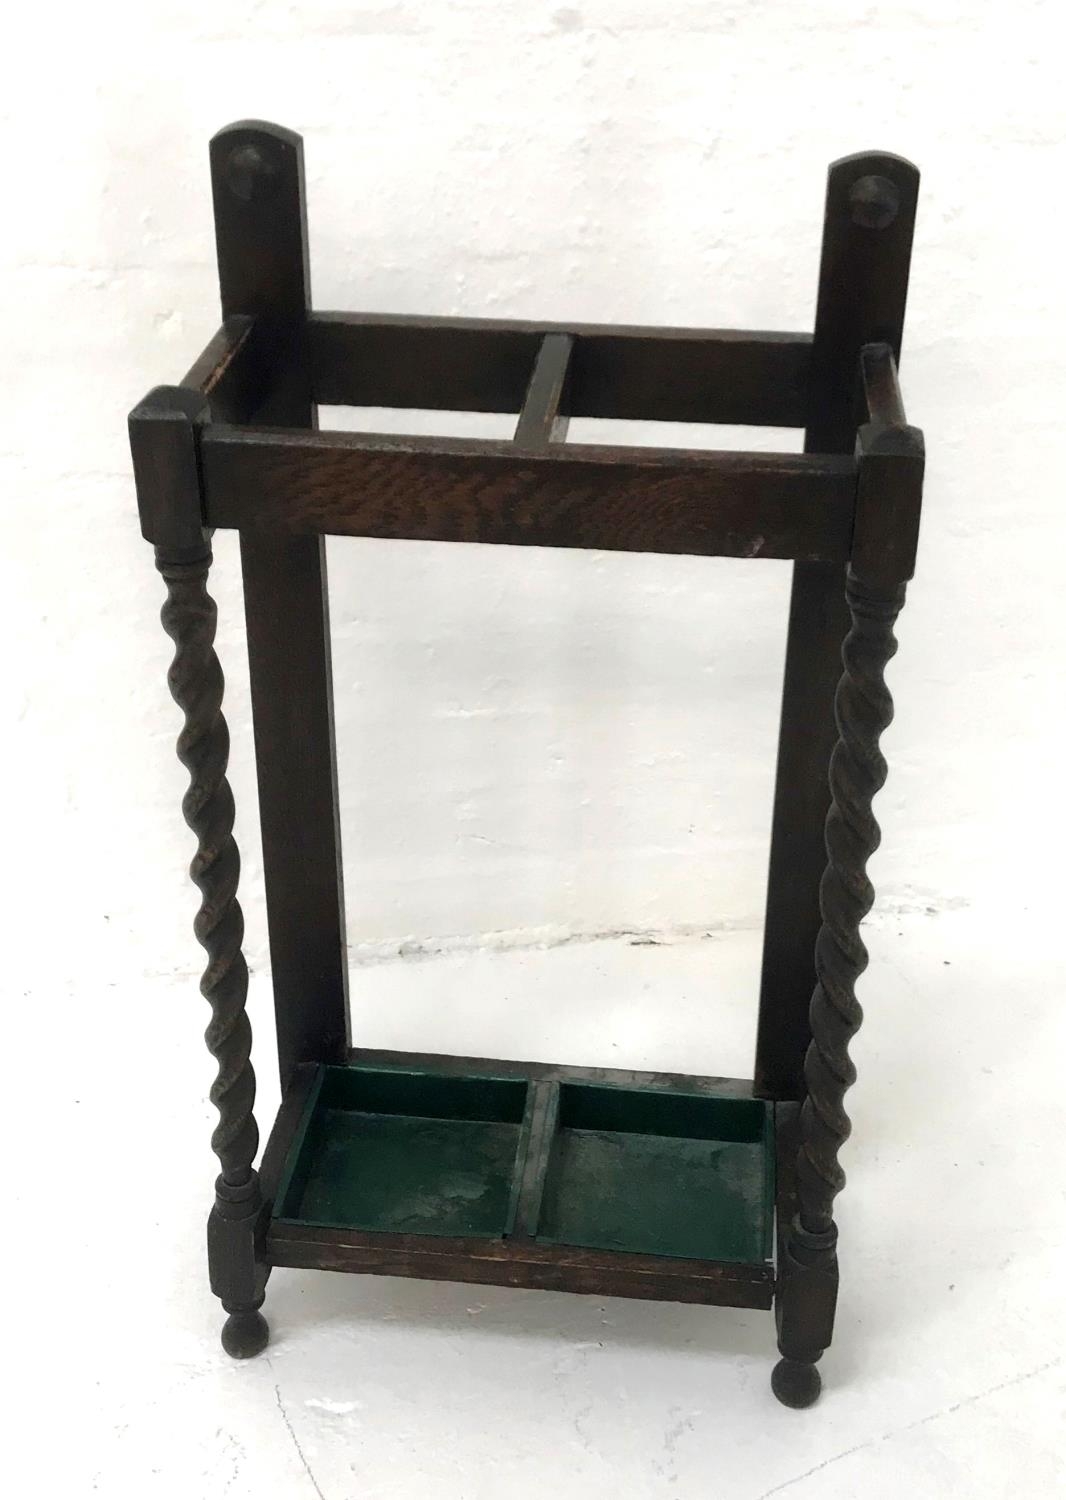 OAK ARTS AND CRAFTS STICK STAND with two divisions and barley twist front columns, with two metal